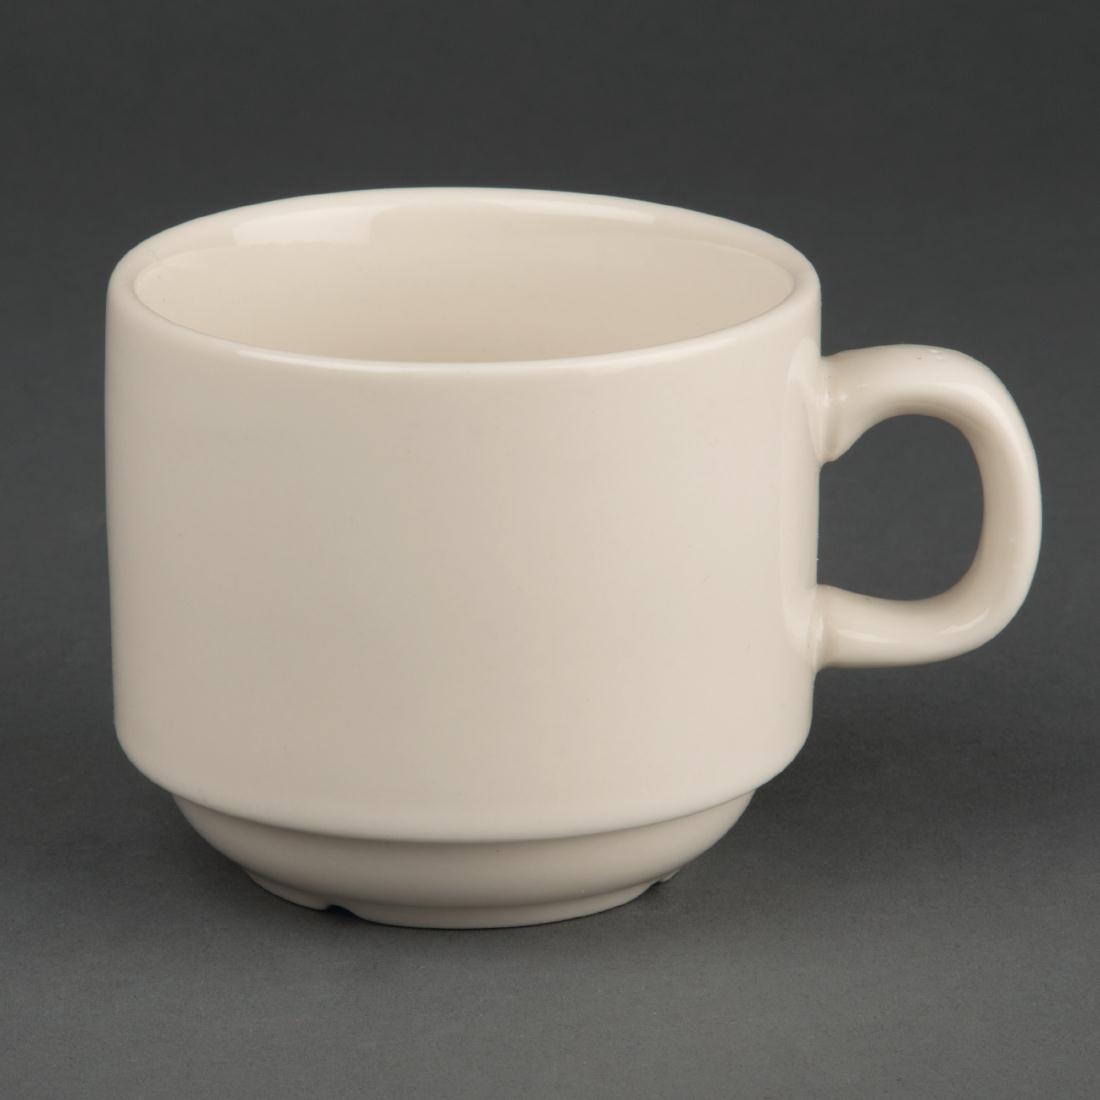 Olympia Ivory Stacking Tea Cups 206ml 7.5oz